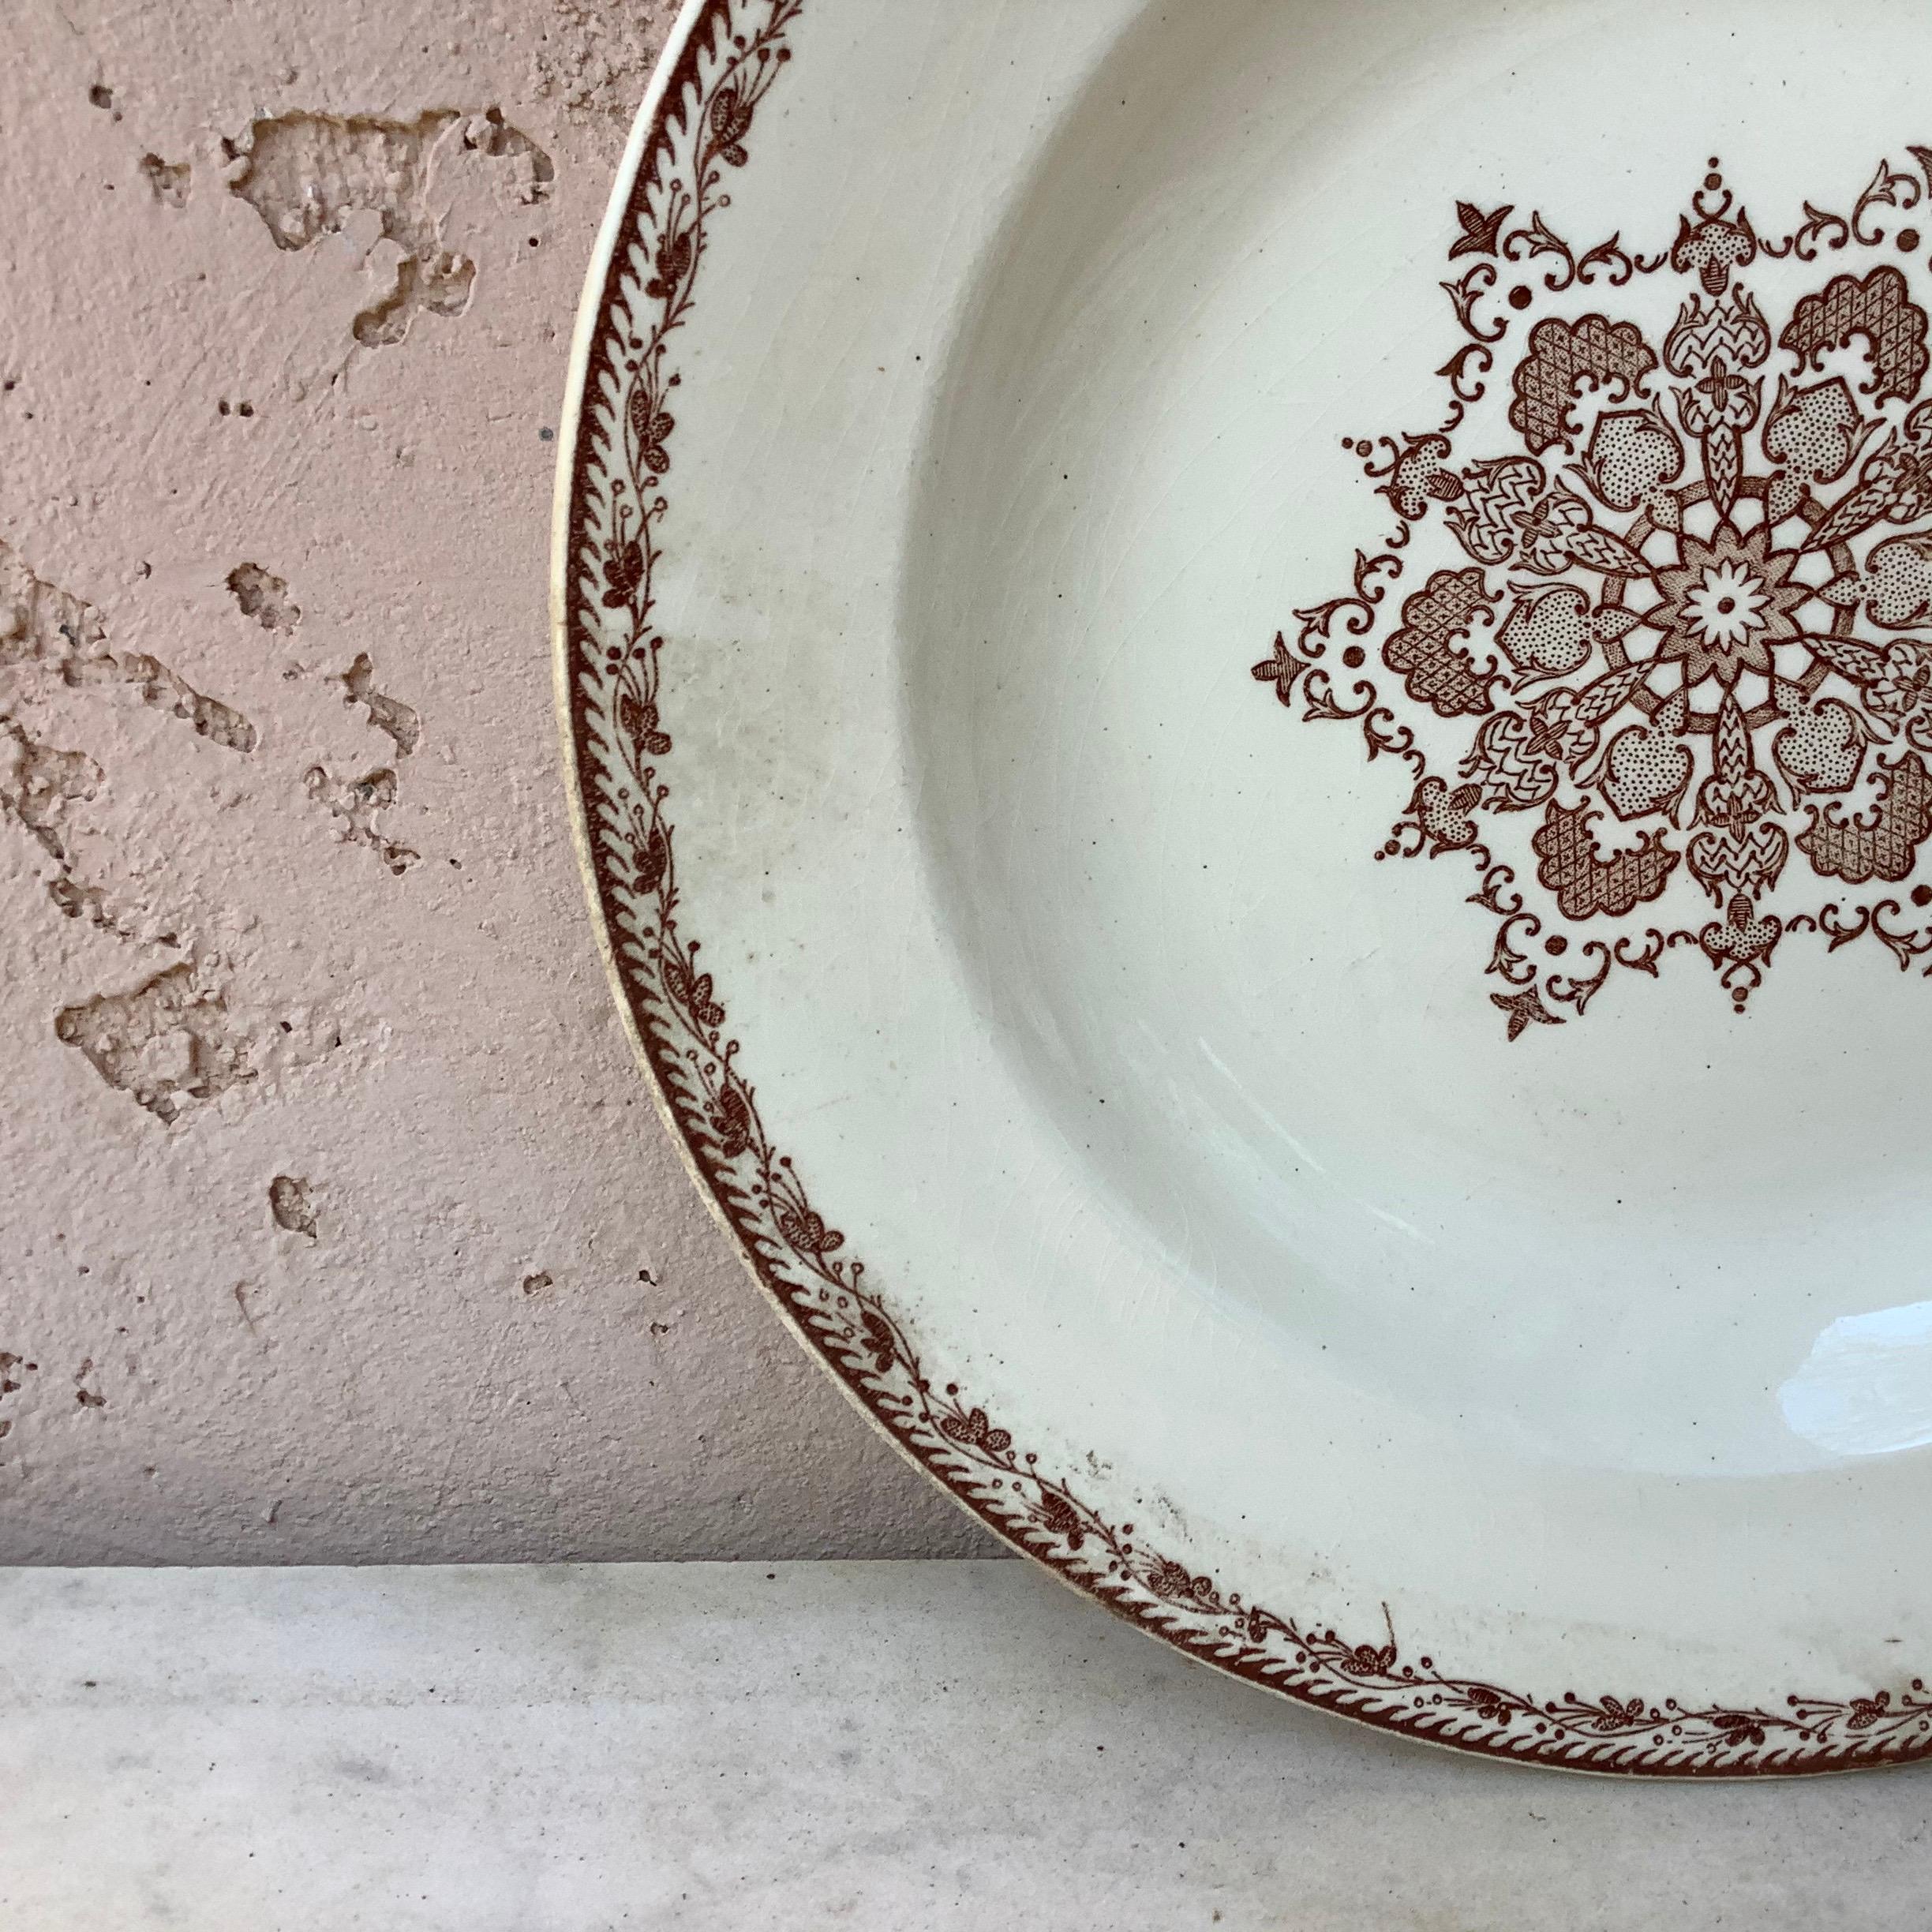 French faience soup plate signed Salins, circa 1890.
Decorated with snowflakes.
8 plates available.